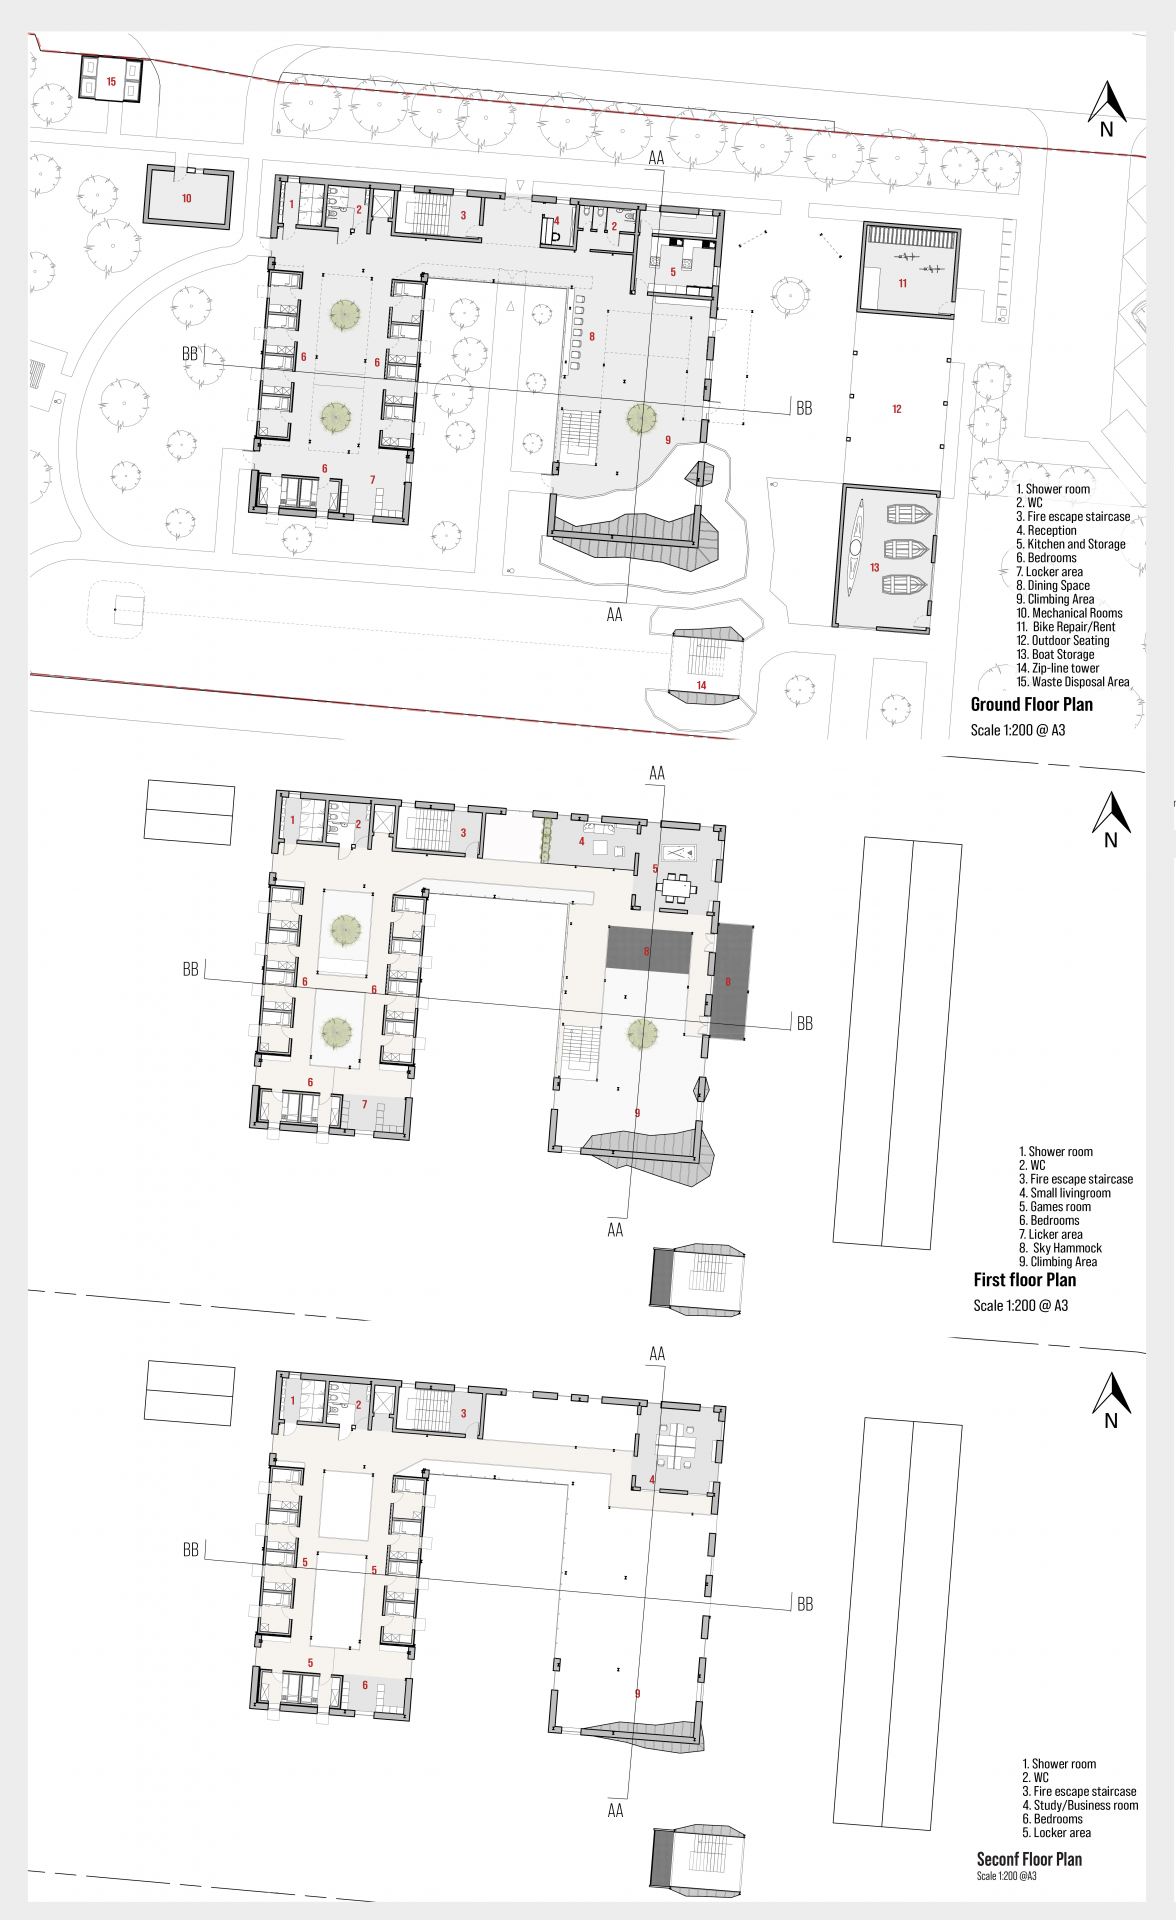 Final floor plans of the project describing its layout, adjacencies and programme.